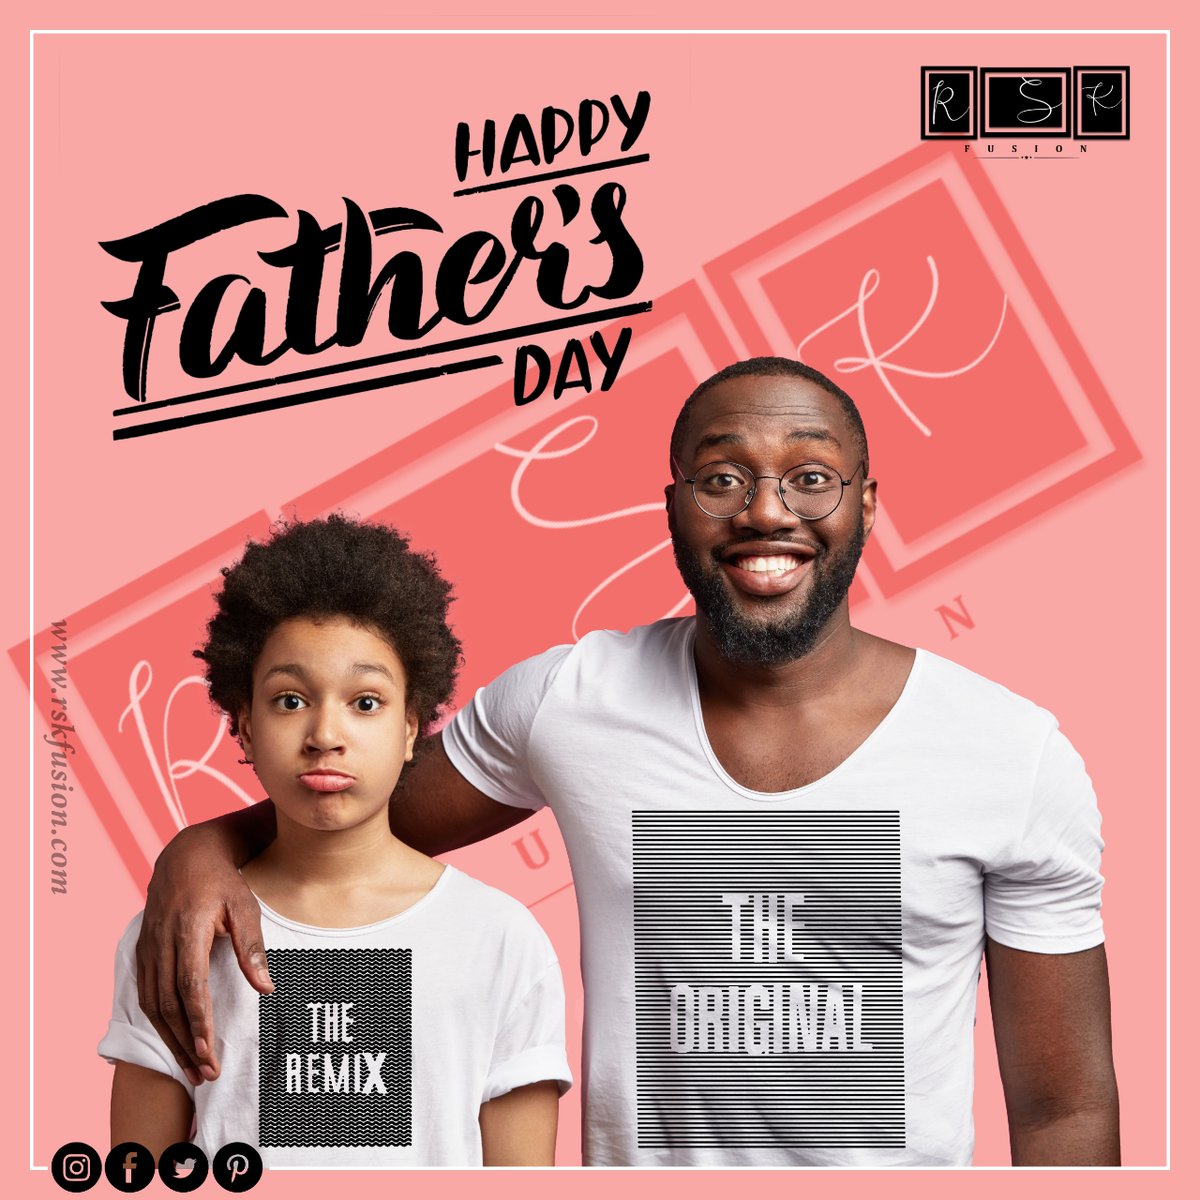 A father doesn’t tell you that he loves you. He shows you.

Happy Father's Day 

#rskfusion #fatherday #fathersdaytshirts #happyfathersday #customtees #customtshirt #trending #dad #fashion #trendyteeze #customizedtshirts #streetstyle #tshirtprinting #printables #tshirtstore